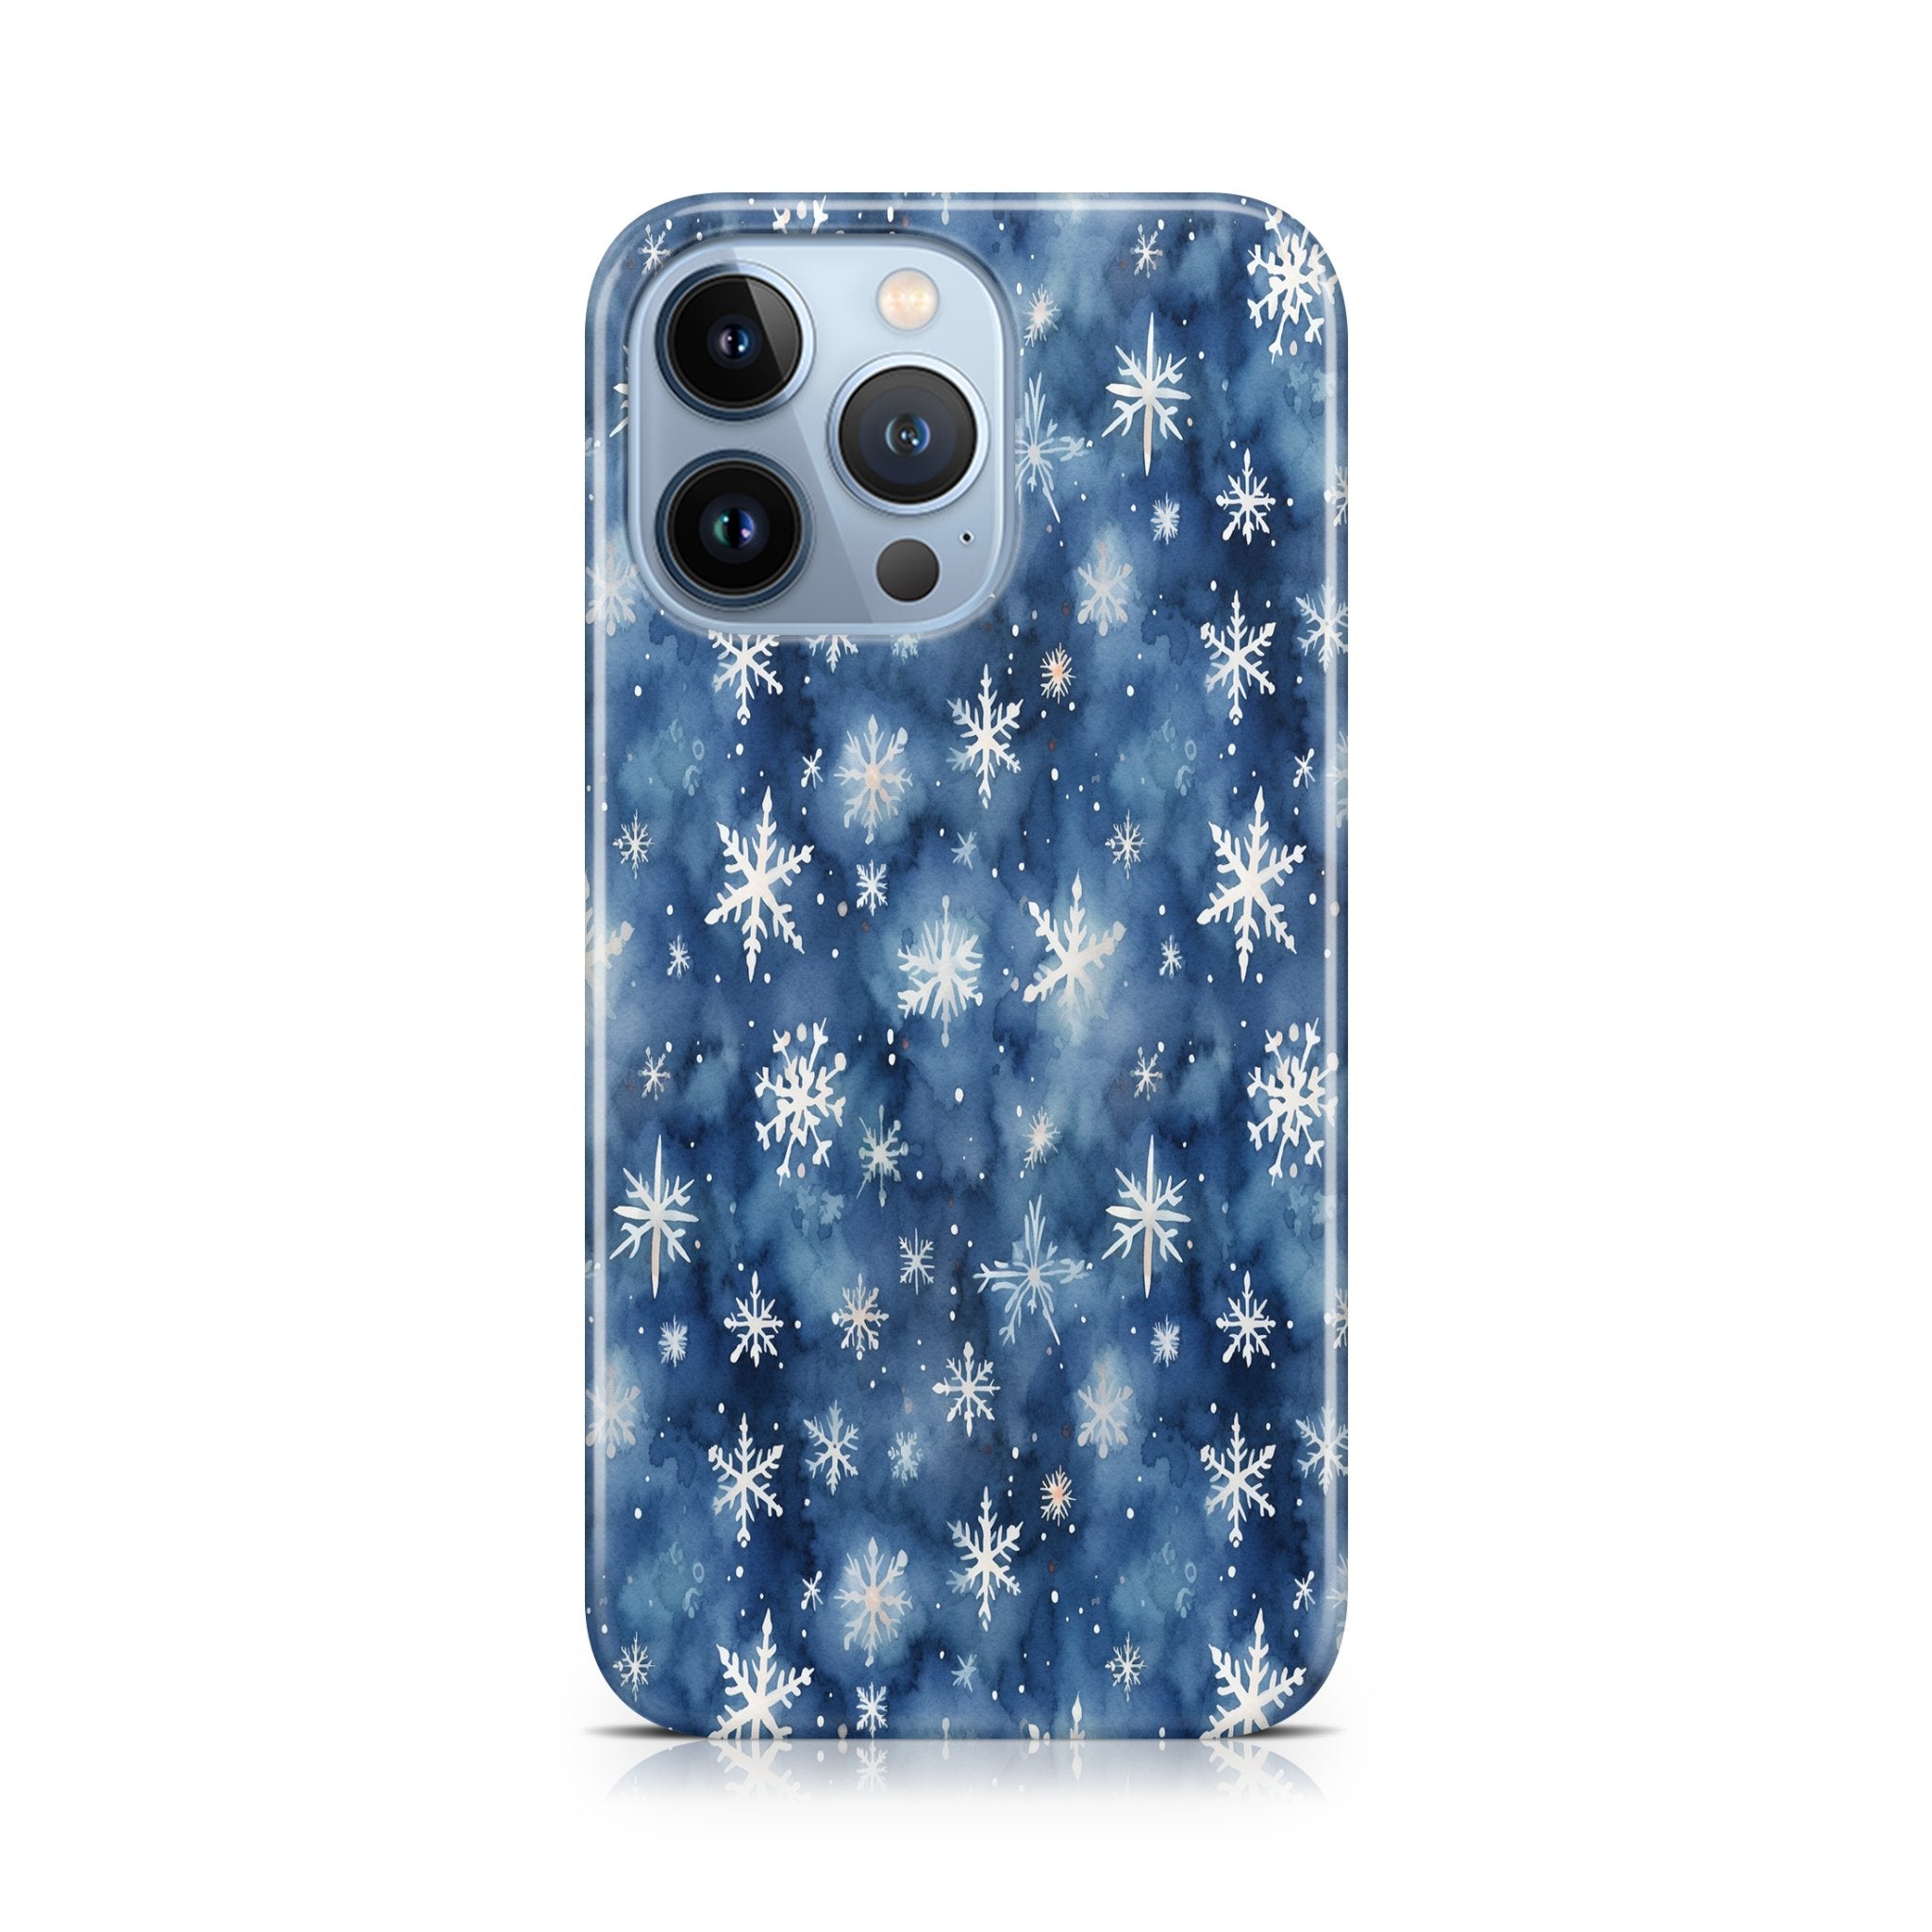 Winter Serenity - iPhone phone case designs by CaseSwagger